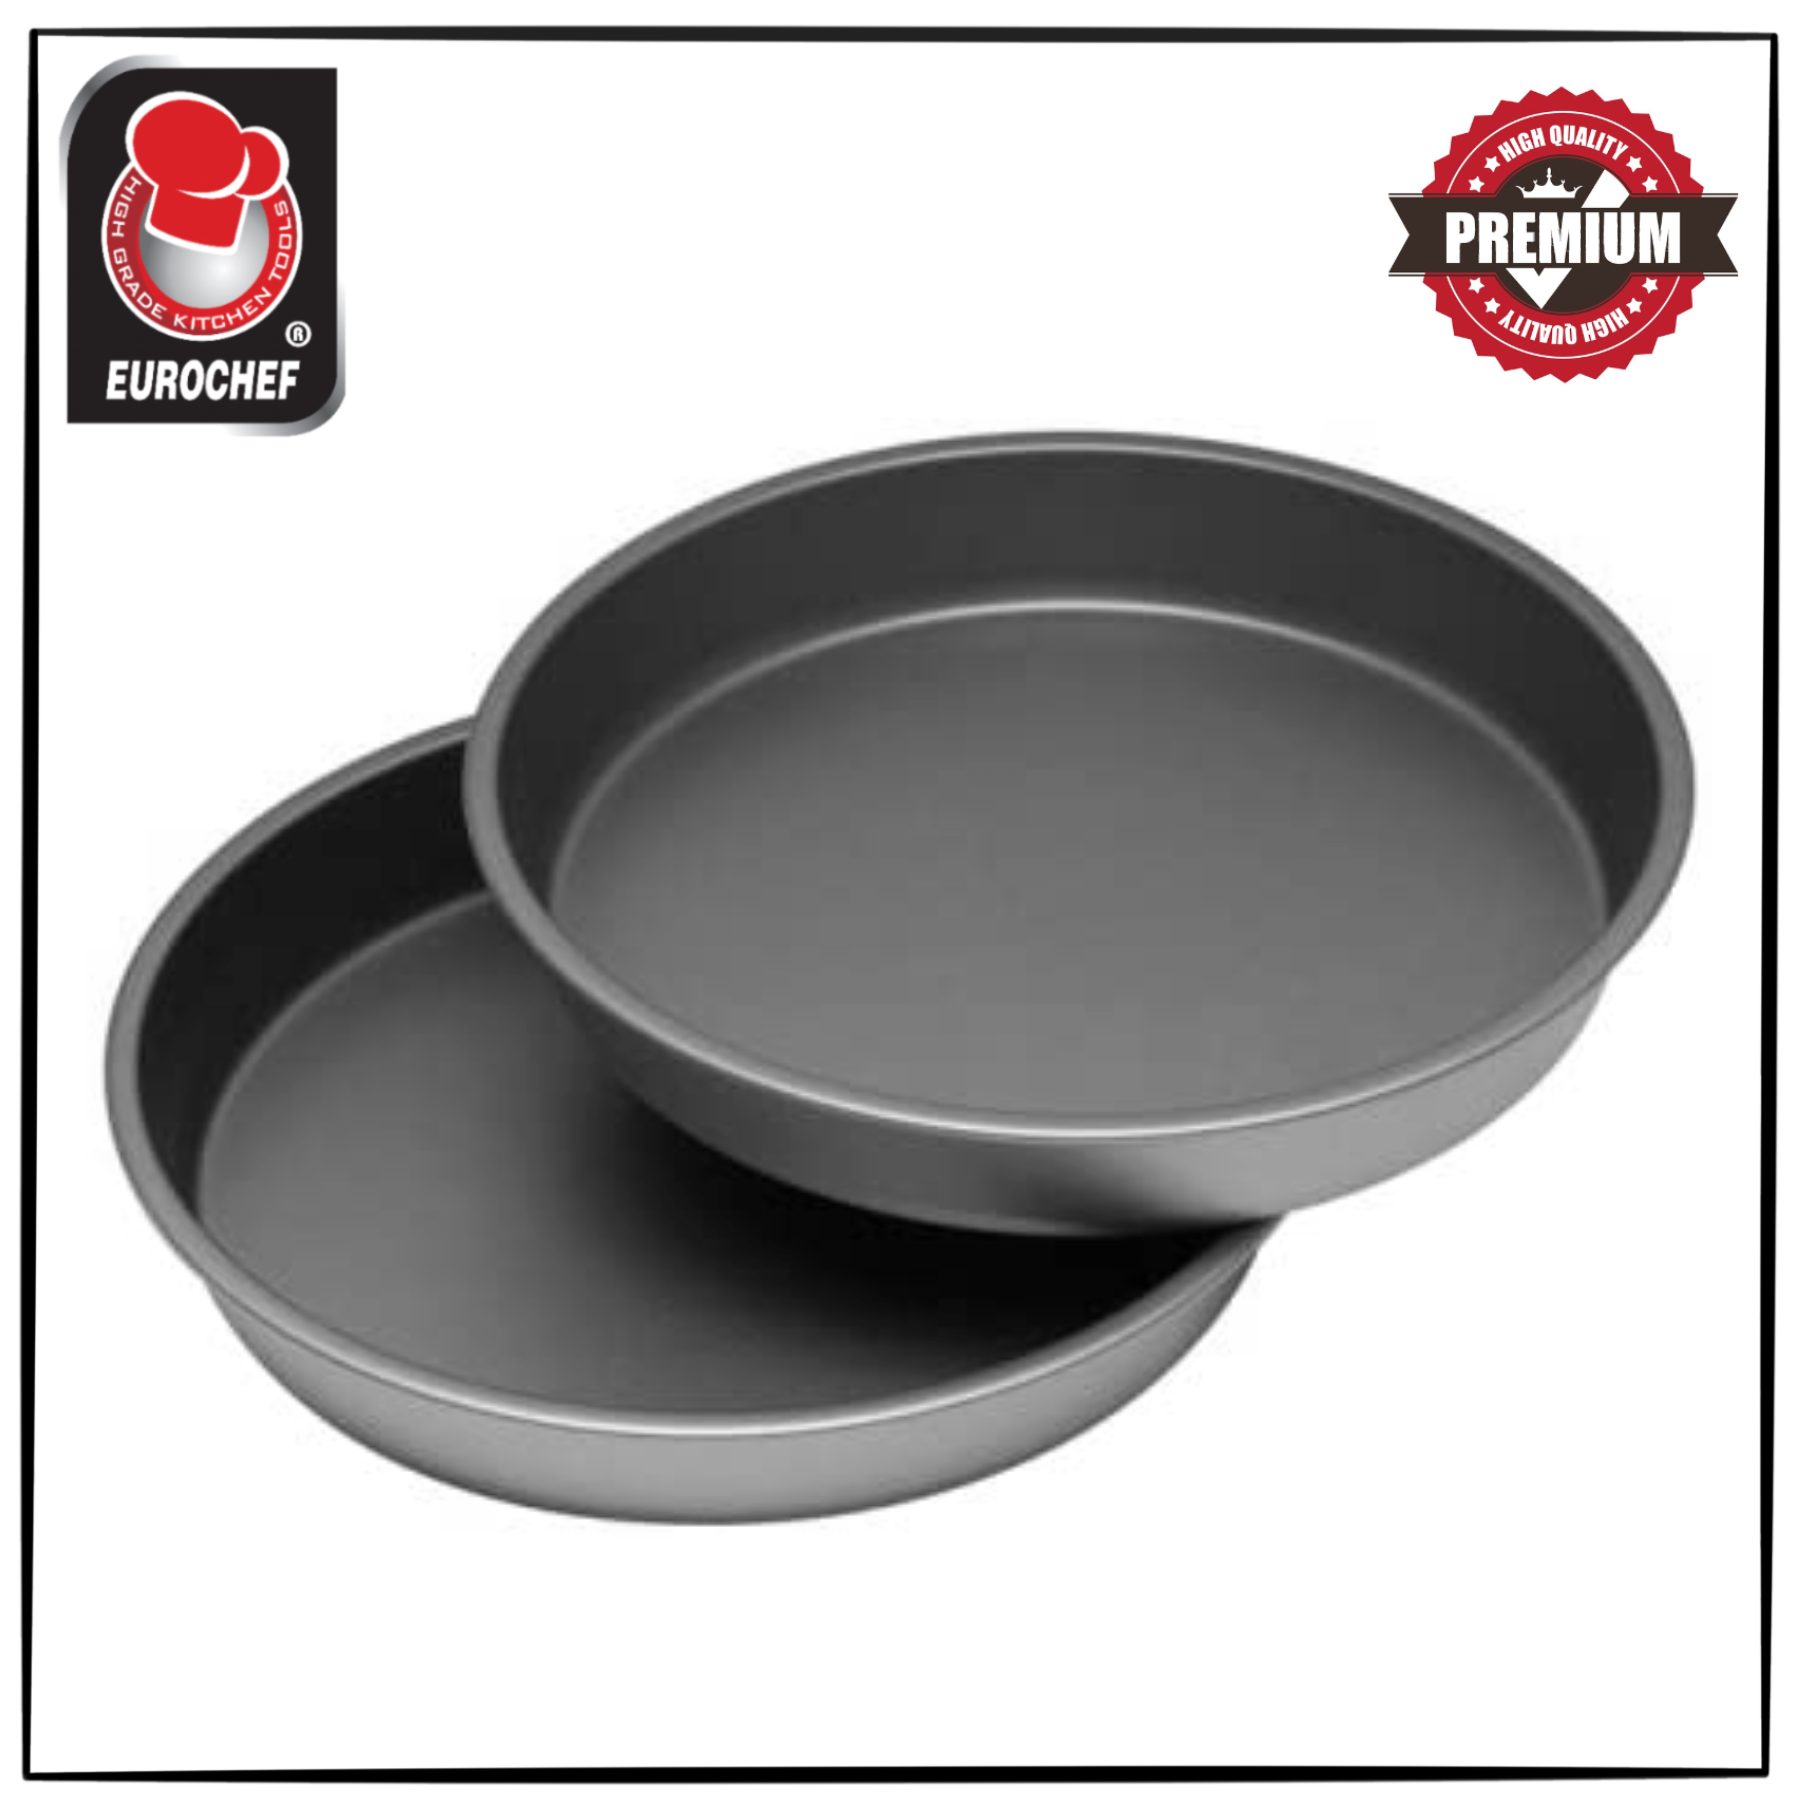 Carbon Steel with Non Stick Surface Baking Round Oven Pizza pan 11 inch Round Pizza Baking Tray Large Non Stick Round Pizza Tray PAN 